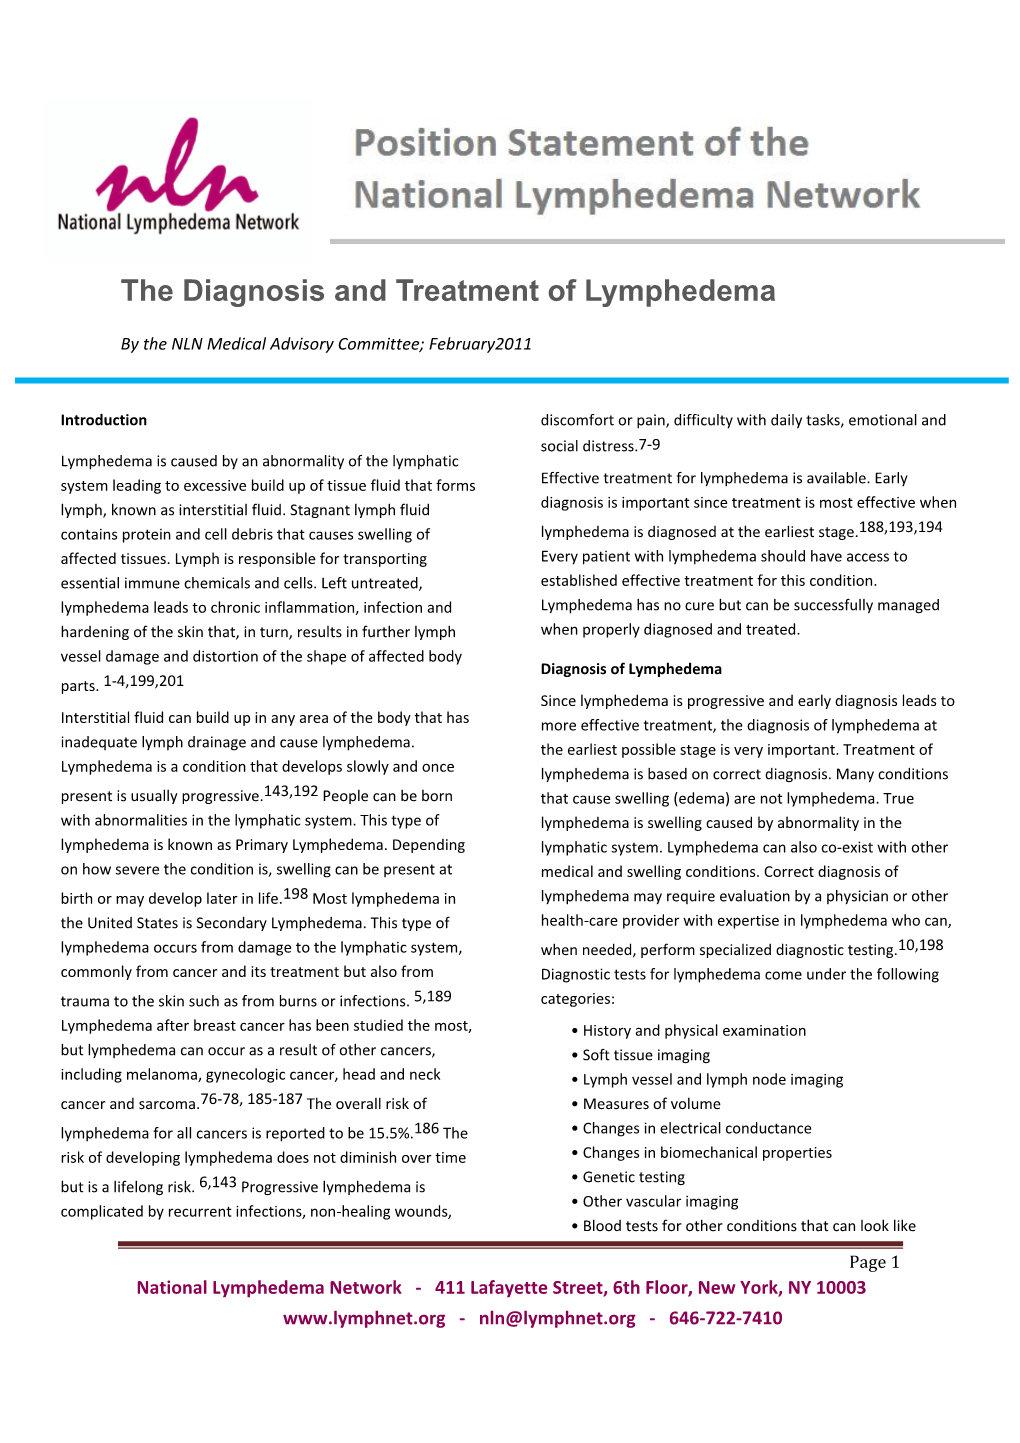 The Diagnosis and Treatment of Lymphedema